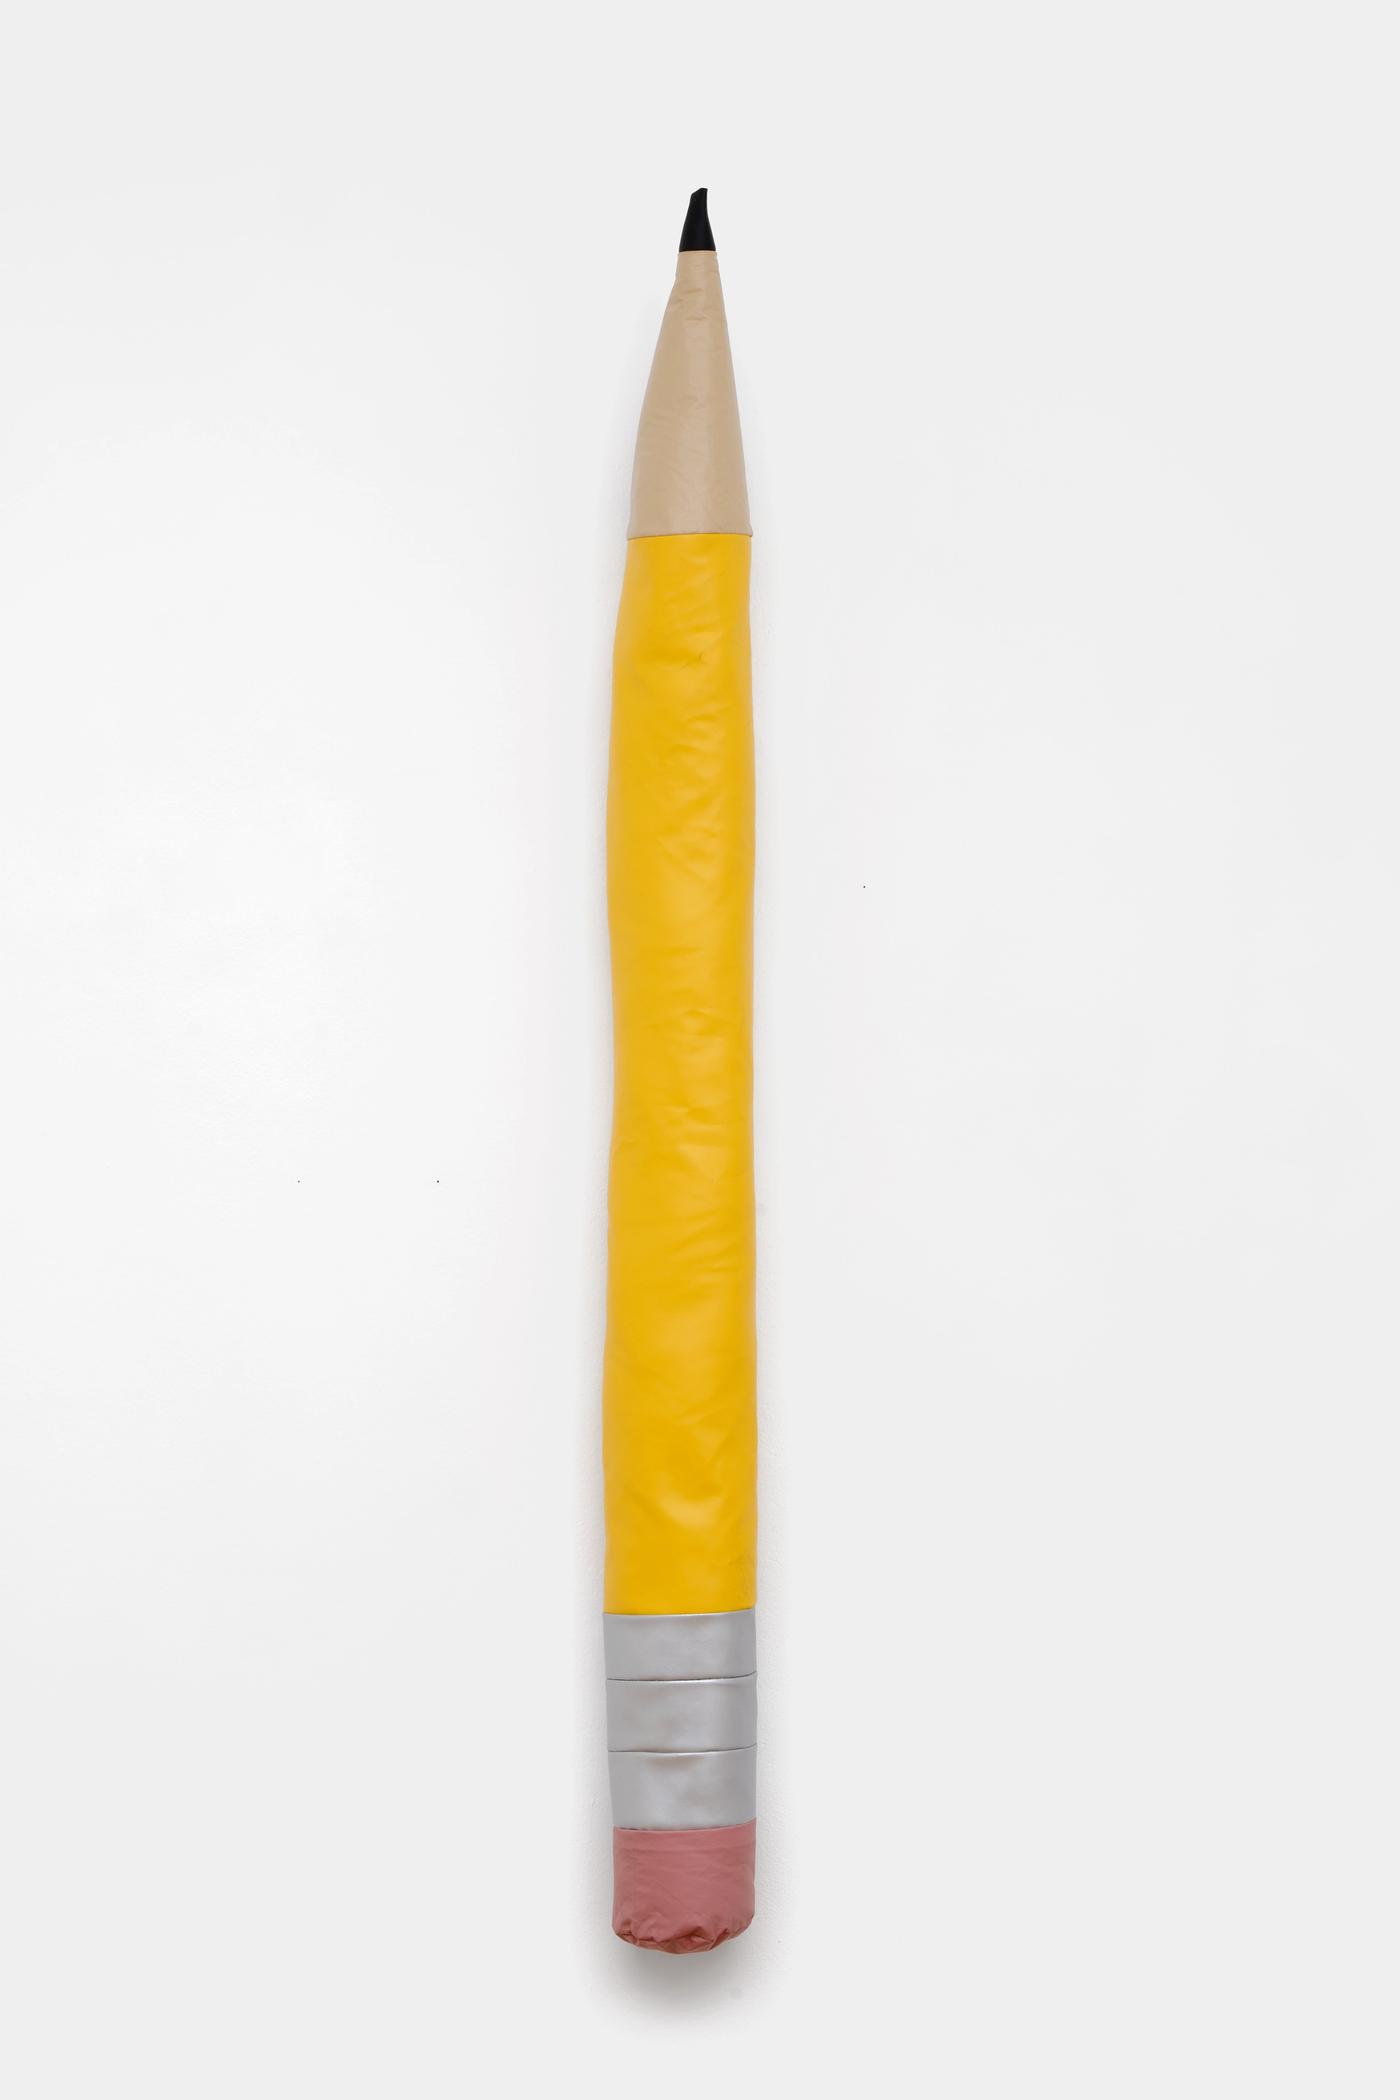 Image of Soft Pencil, 2020: Vinyl and polyfill